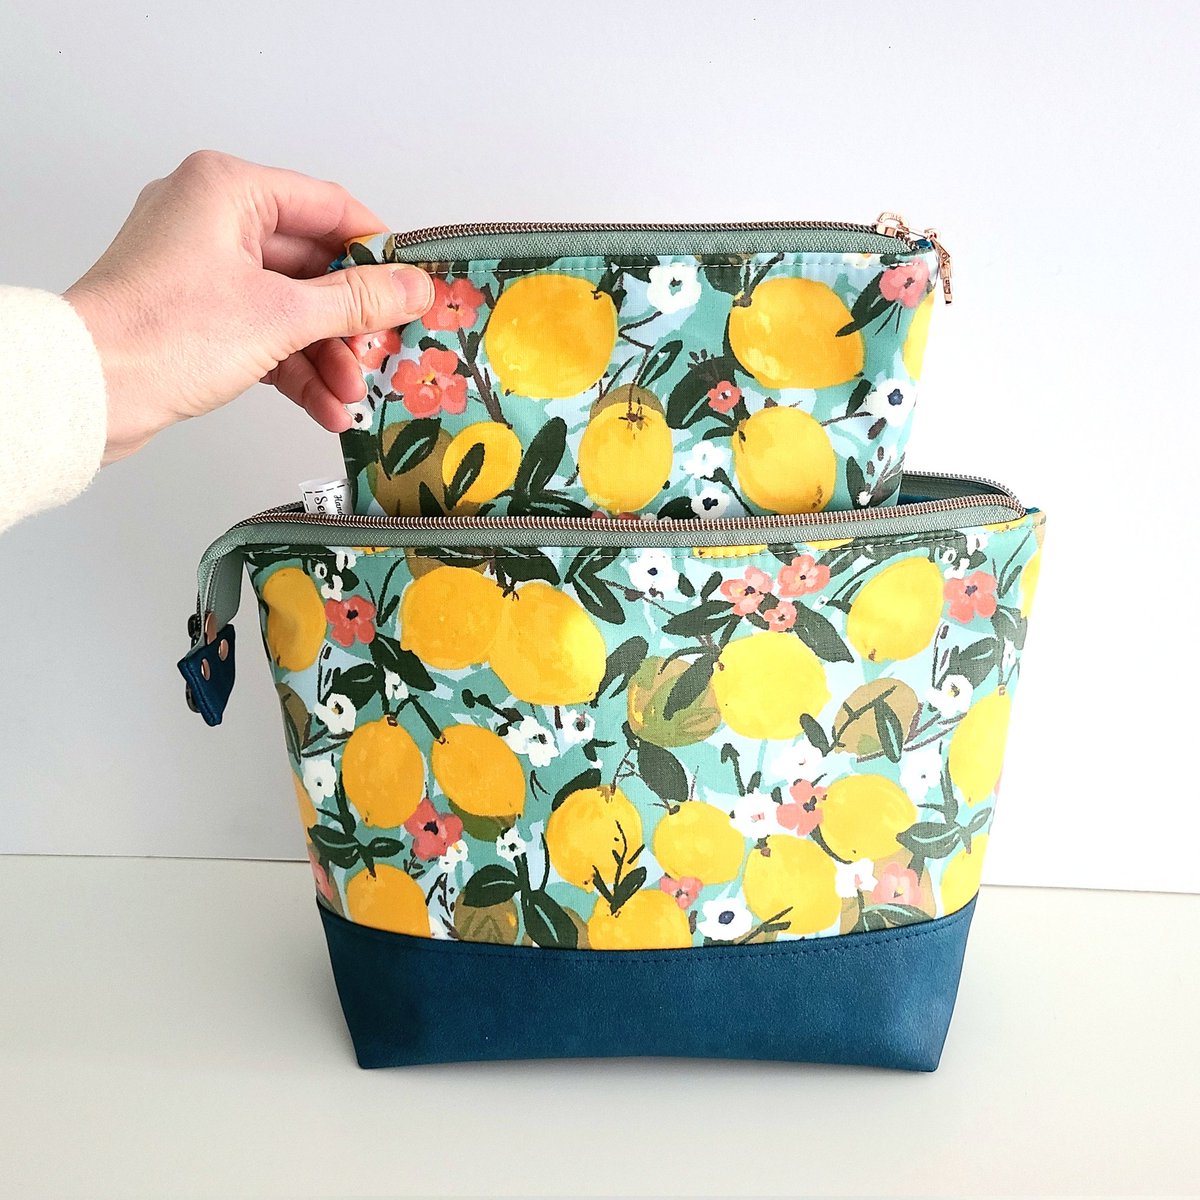 Time for a fresh new toiletry bag? Pop over to see my latest handmade bags in stunning new designs #EarlyBiz #shopindie #handmadegifts #thursdaymorning sewsofia.com/collections/to…